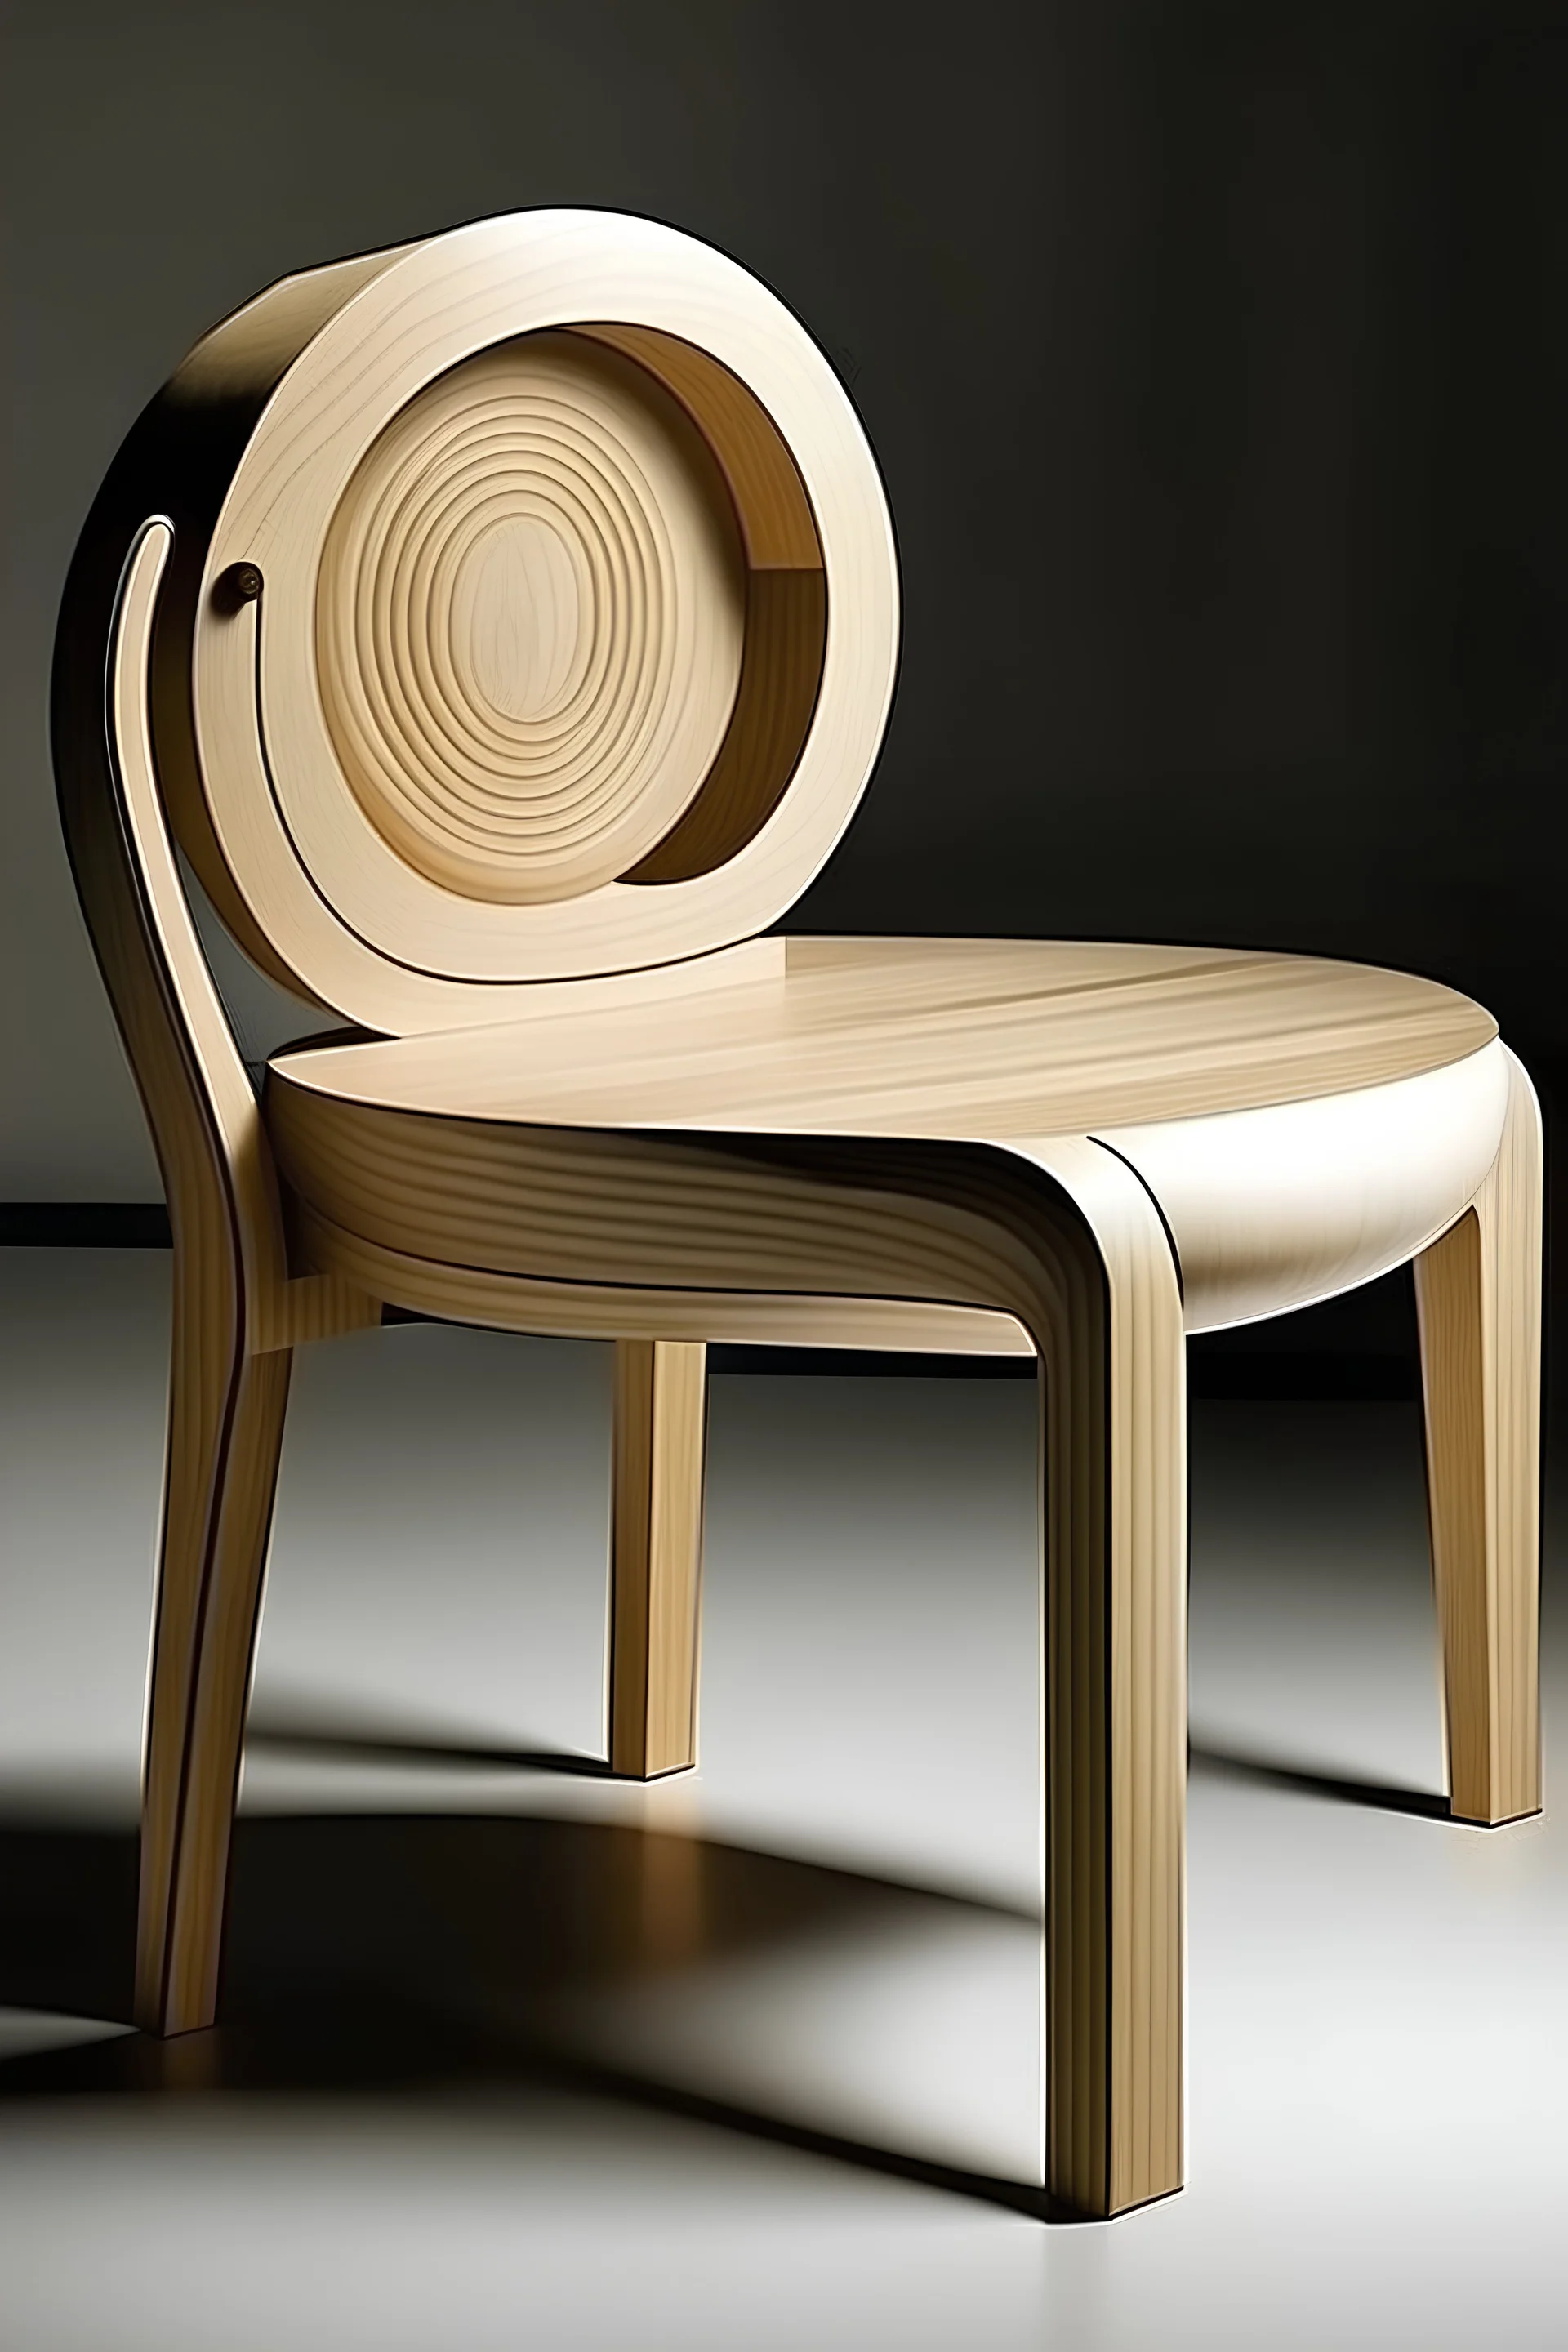 Chair design with circle